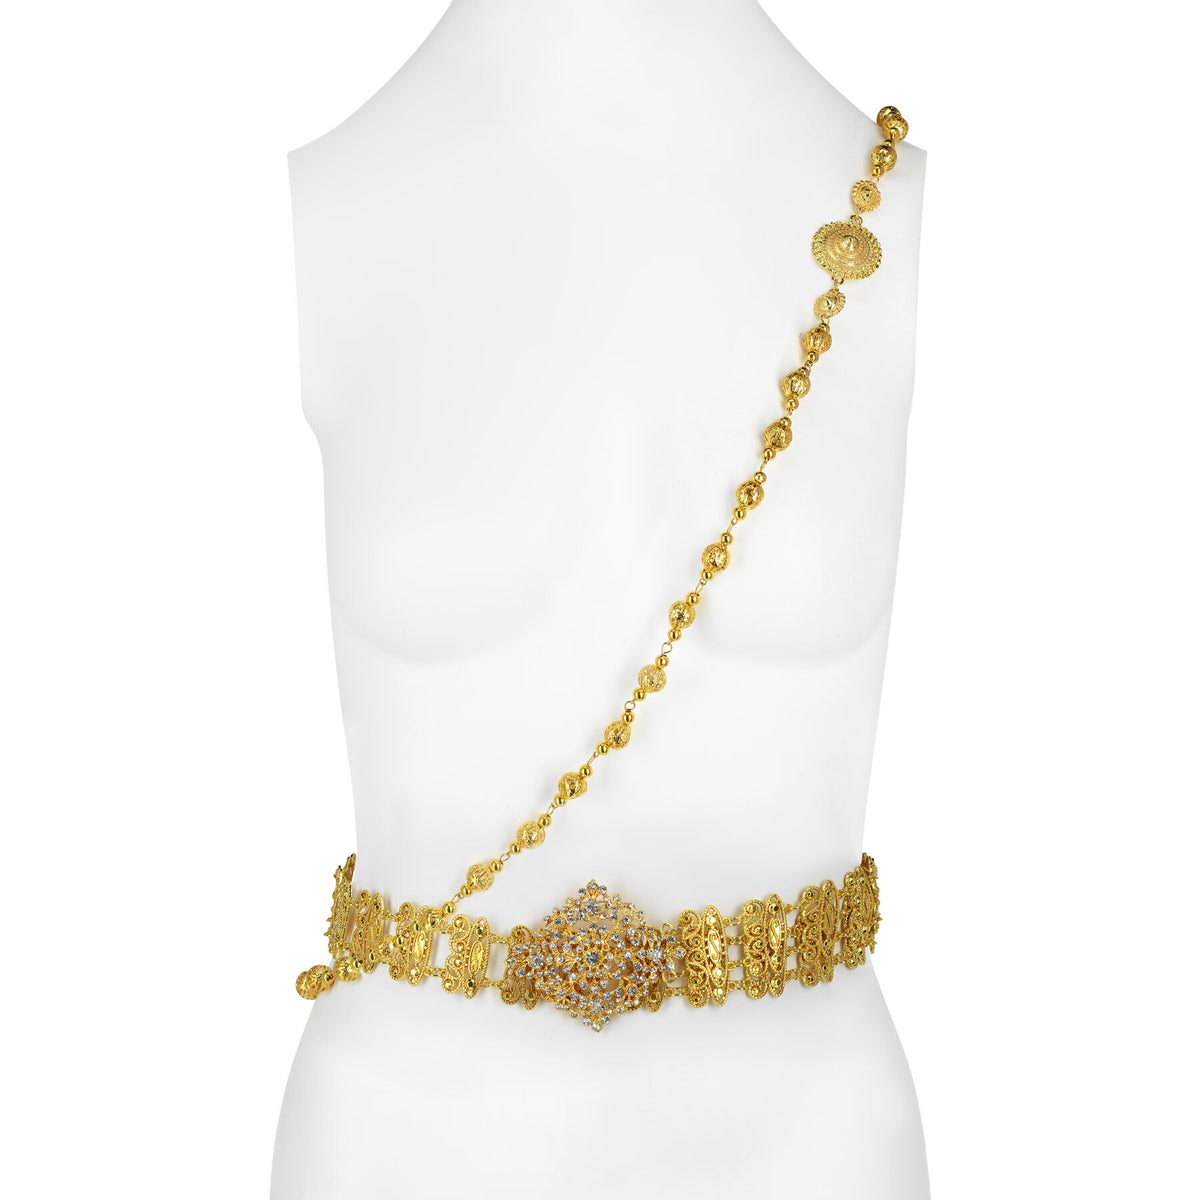 Our rhinestone gold belt and body chain jewelry set is extra glamourous. 